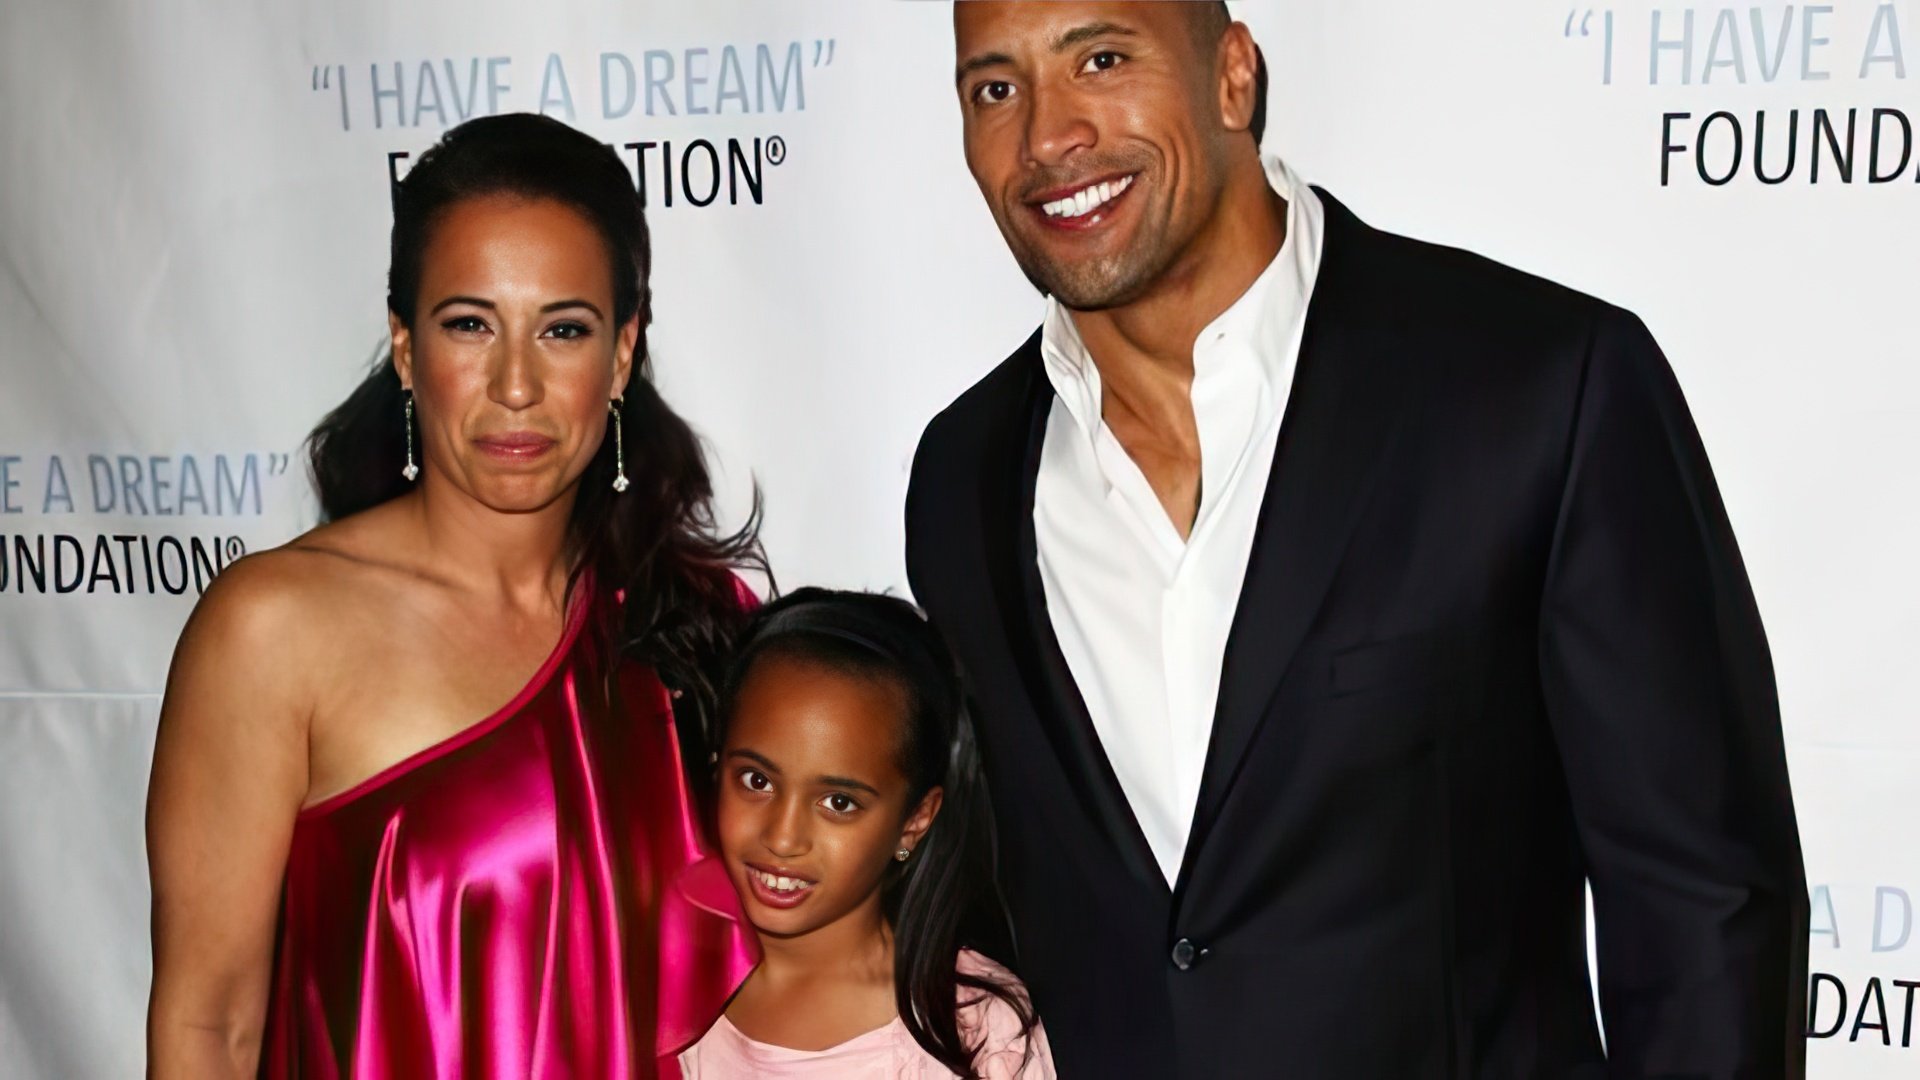 Dwayne Johnson with his first wife and daughter